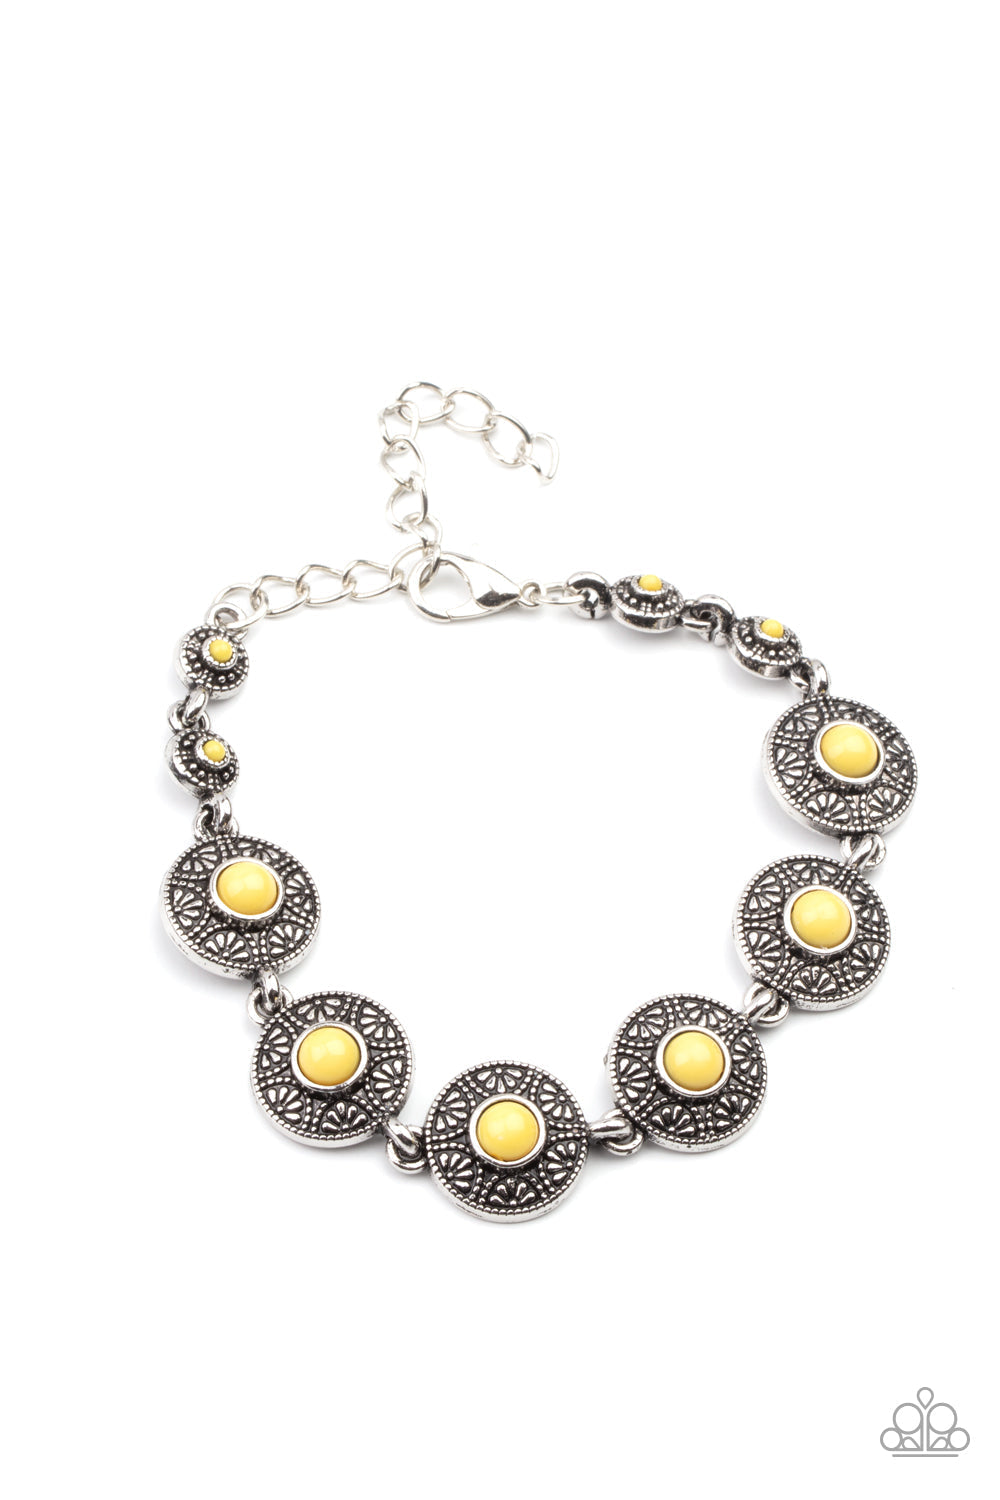 Springtime Special - Yellow and Silver Bracelet - Paparazzi Accessories - Dotted with sunny Illuminating beaded centers, dainty floral embossed silver frames delicately link around the wrist for a colorful springtime look. Features an adjustable clasp closure. Sold as one individual bracelet.